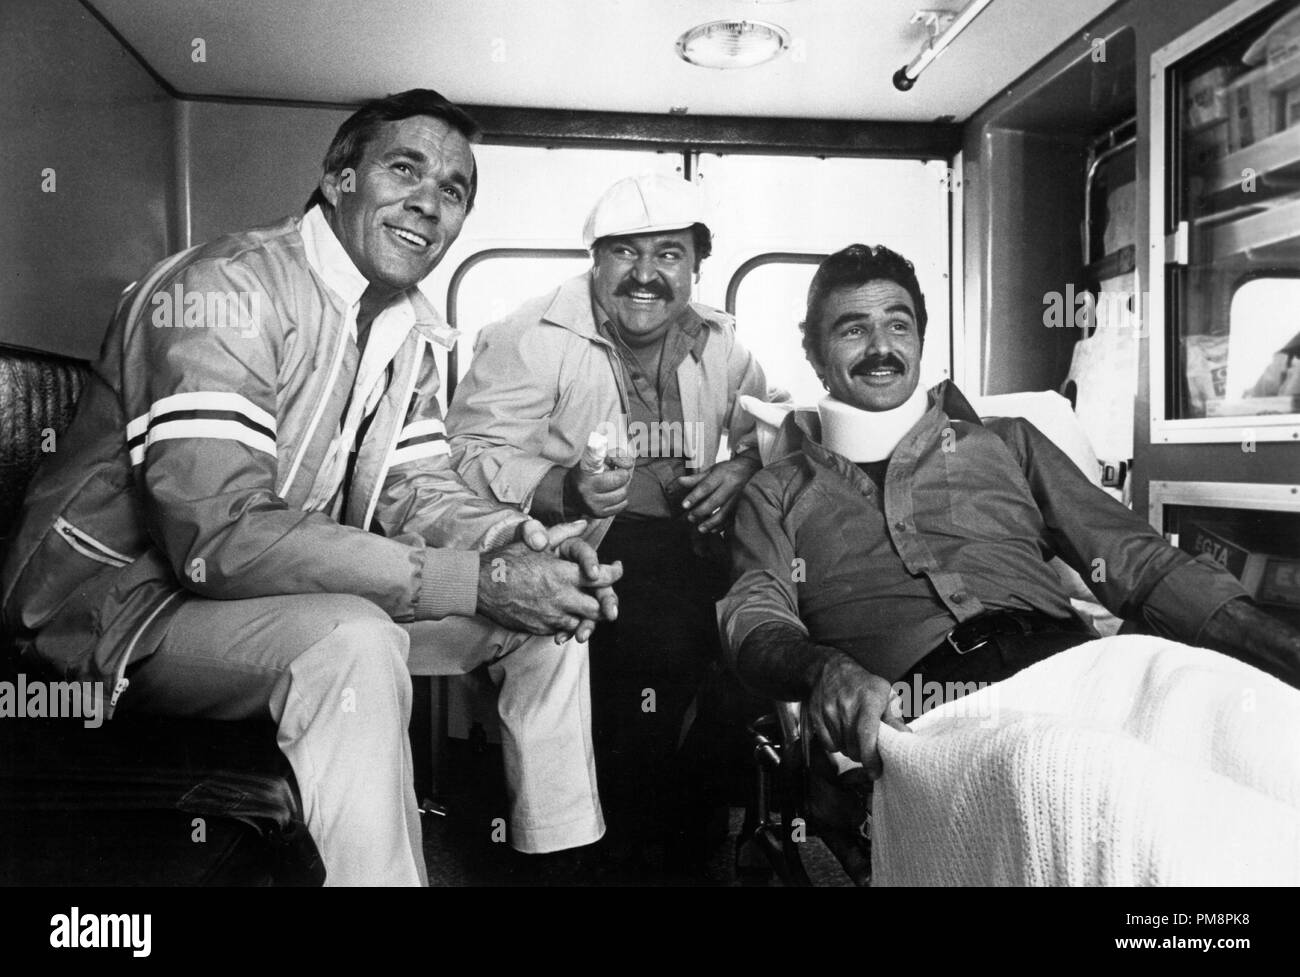 Studio Publicity Still from 'The Cannonball Run' Director Hal Needham, Dom DeLuise, Burt Reynolds © 1981 20th Century Fox All Rights Reserved   File Reference # 31713047THA  For Editorial Use Only Stock Photo